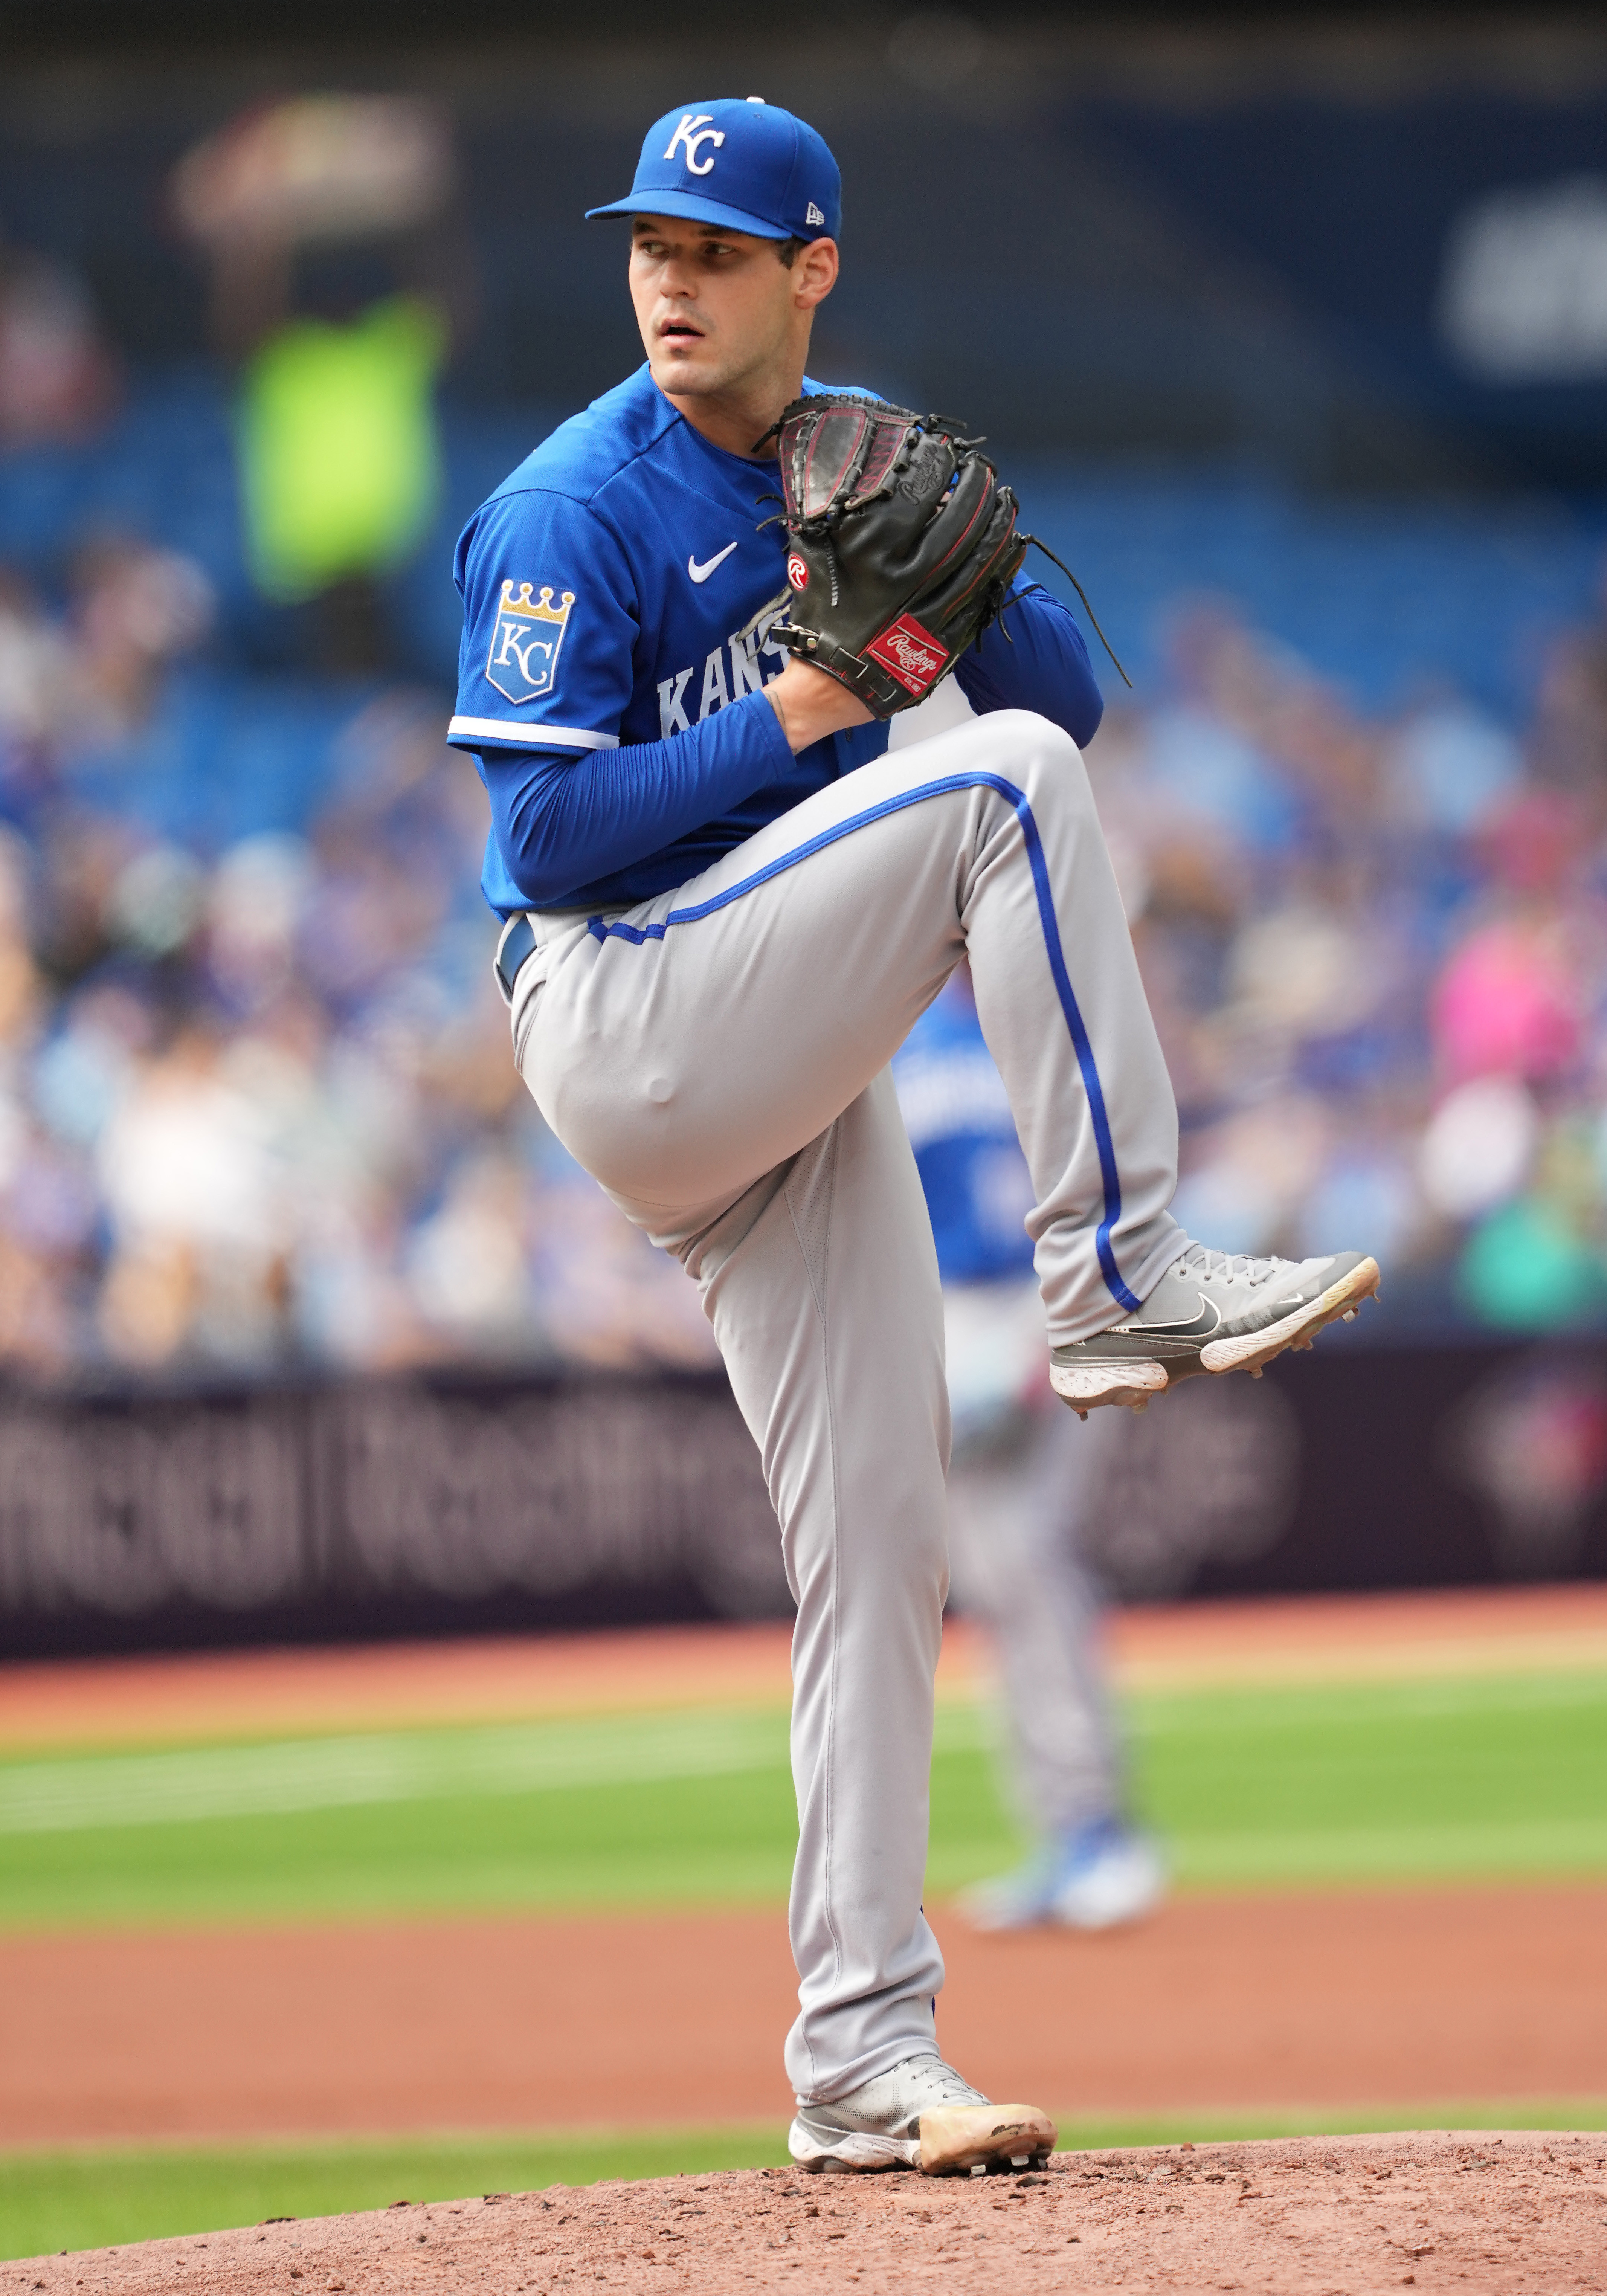 KC's Ragans throws three straight wild pitches, Blue Jays sweep